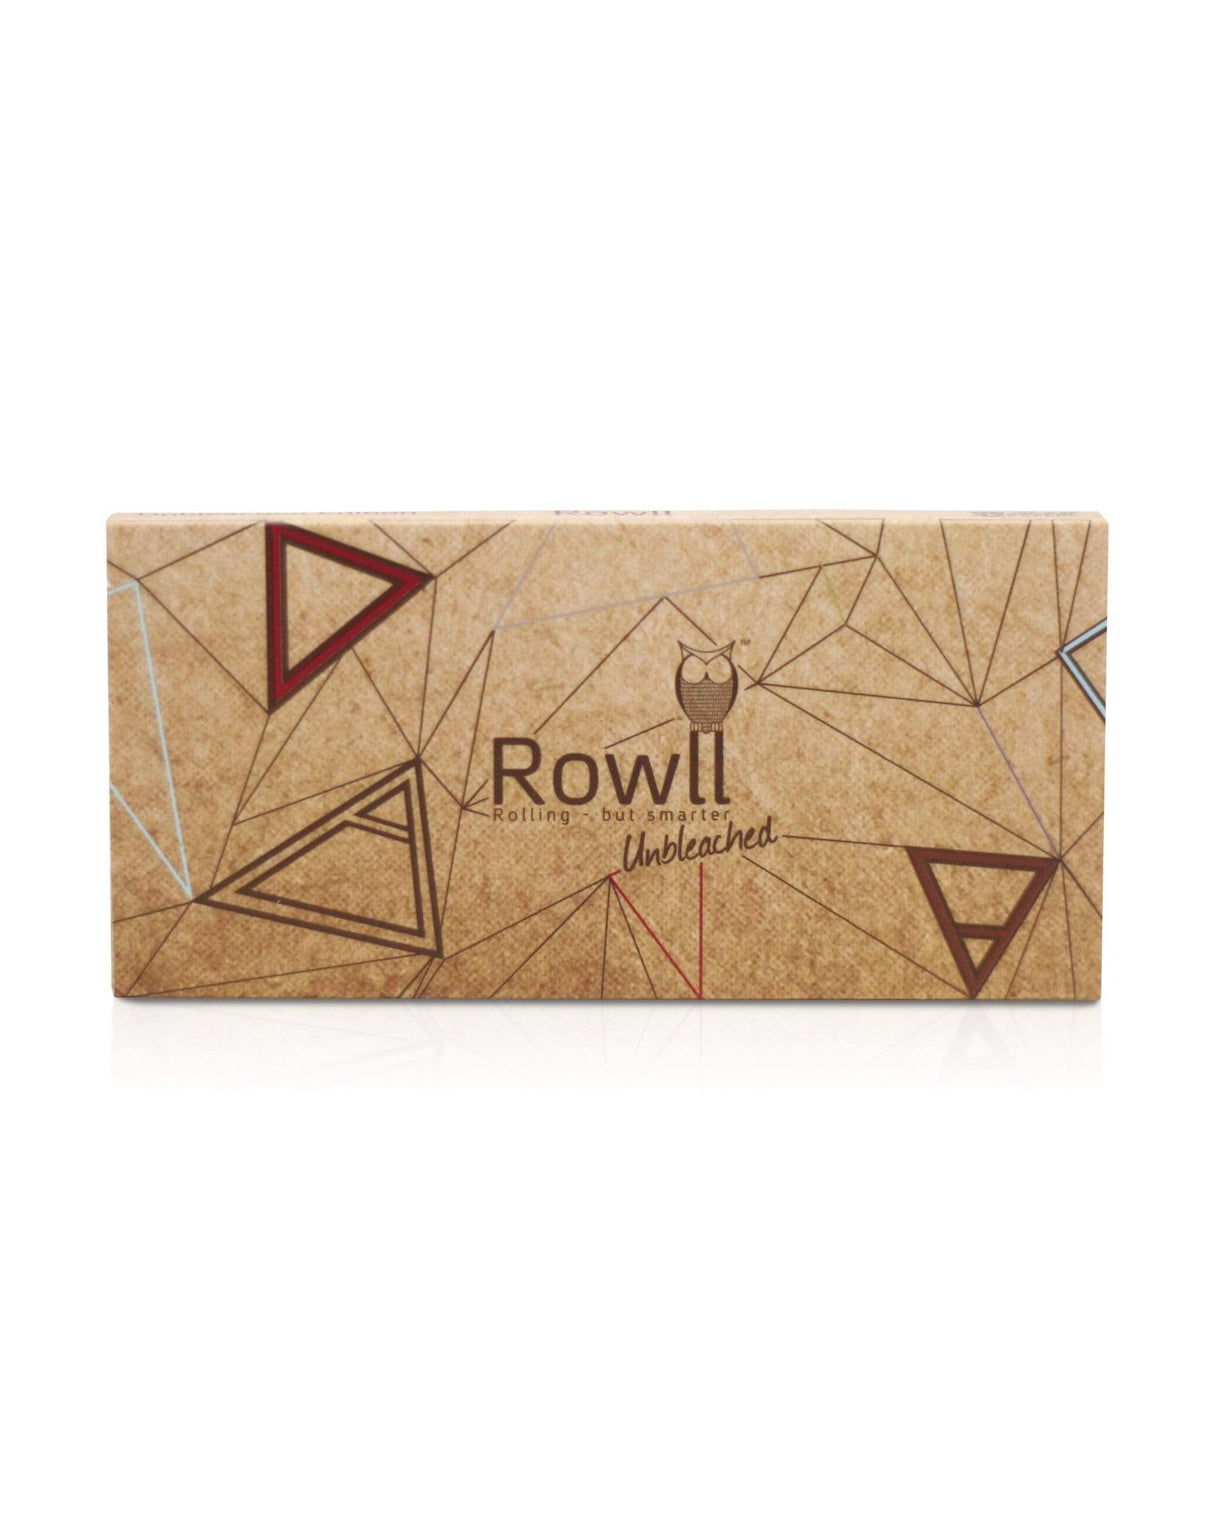 Rowll Rolling Kit front view, featuring unbleached papers and compact card grinder, portable design